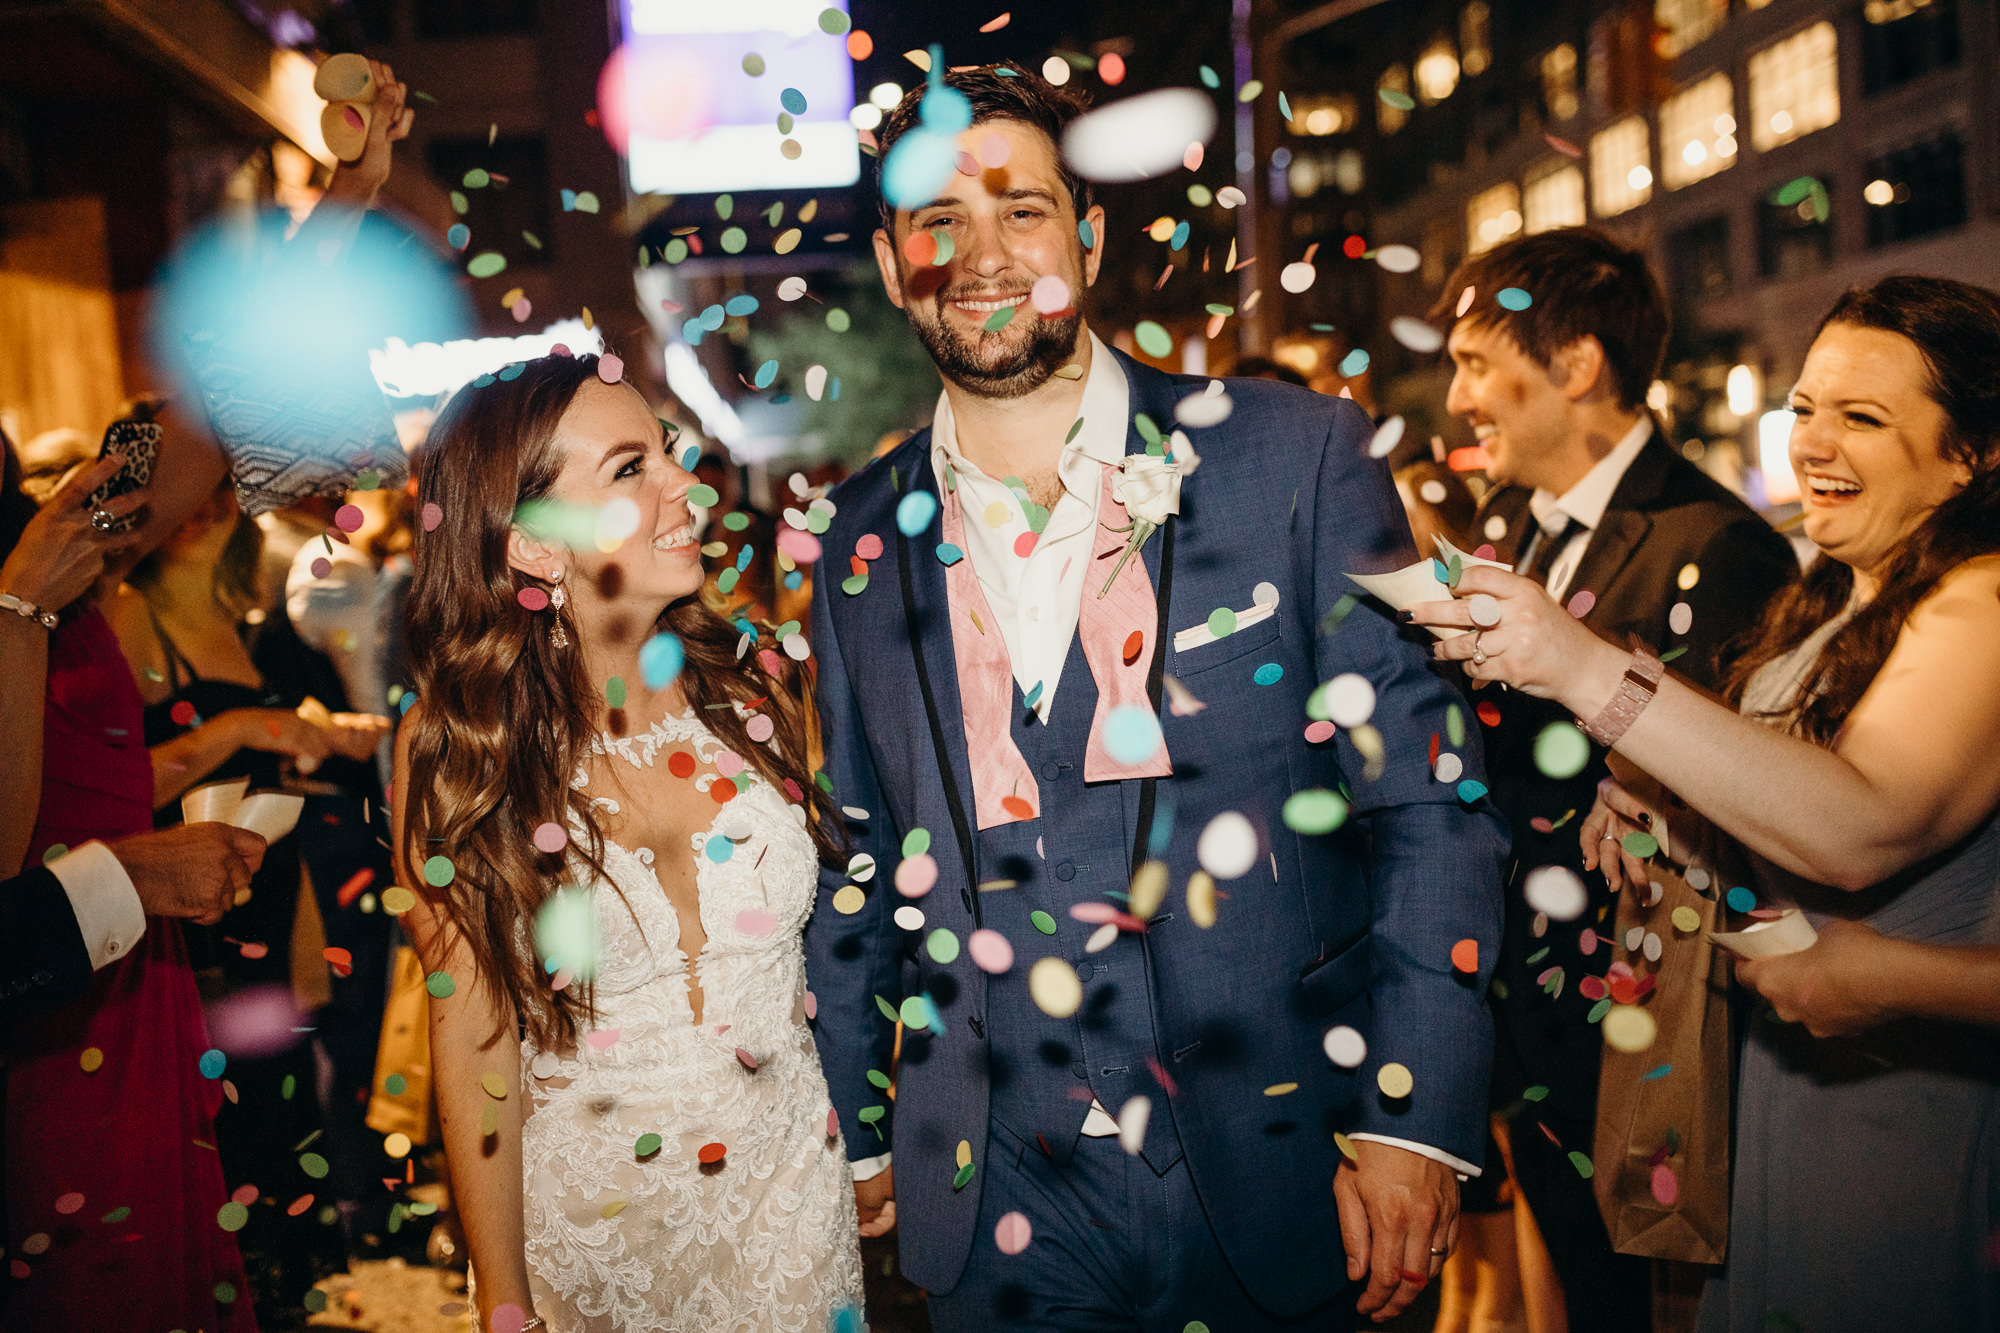 a bride and groom during their confetti exit at their wedding reception at city winery in new york city, new york